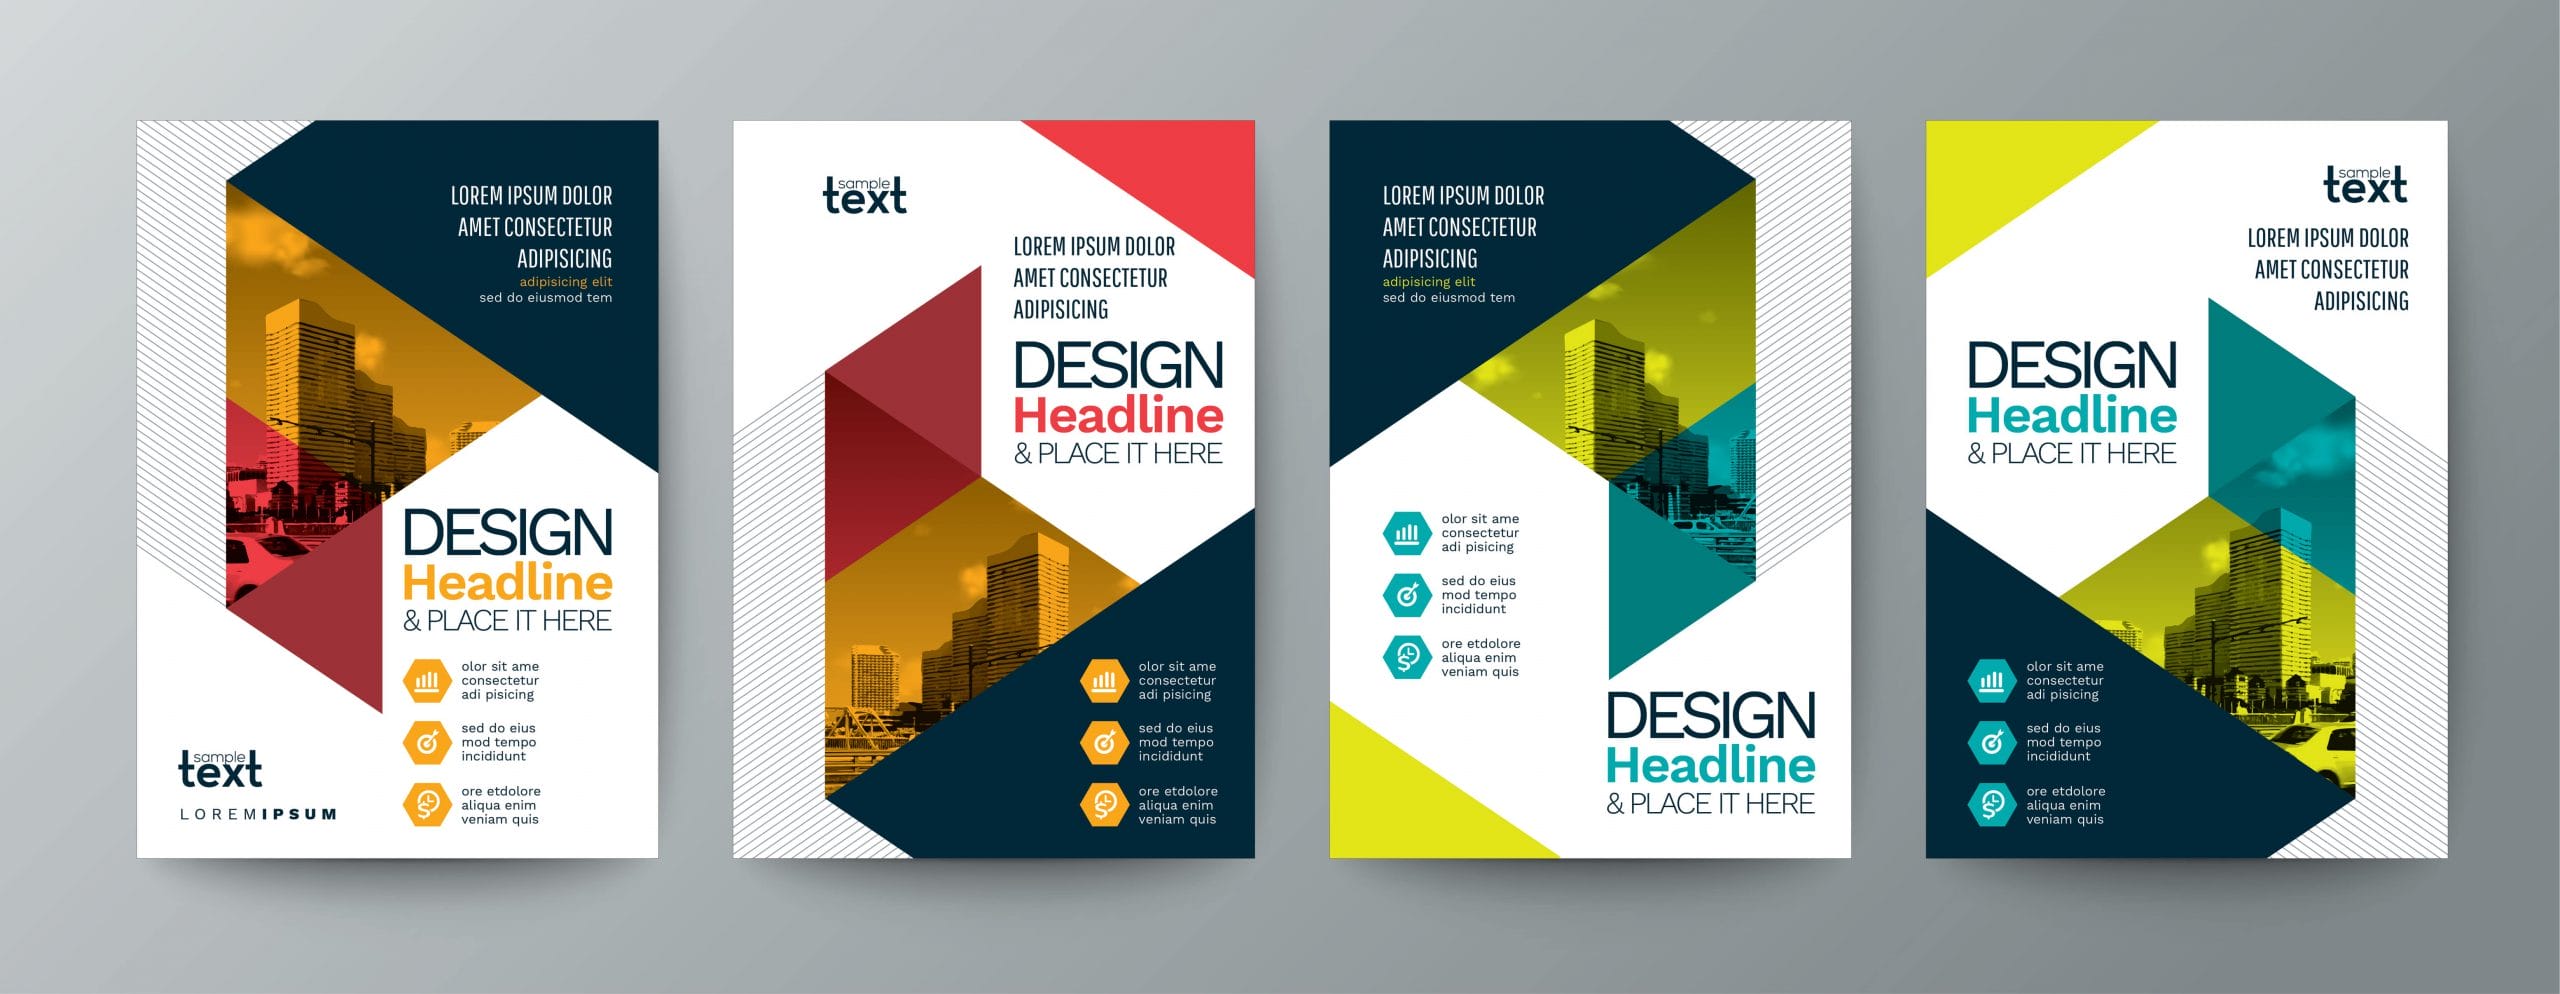 brochure design dos and don'ts